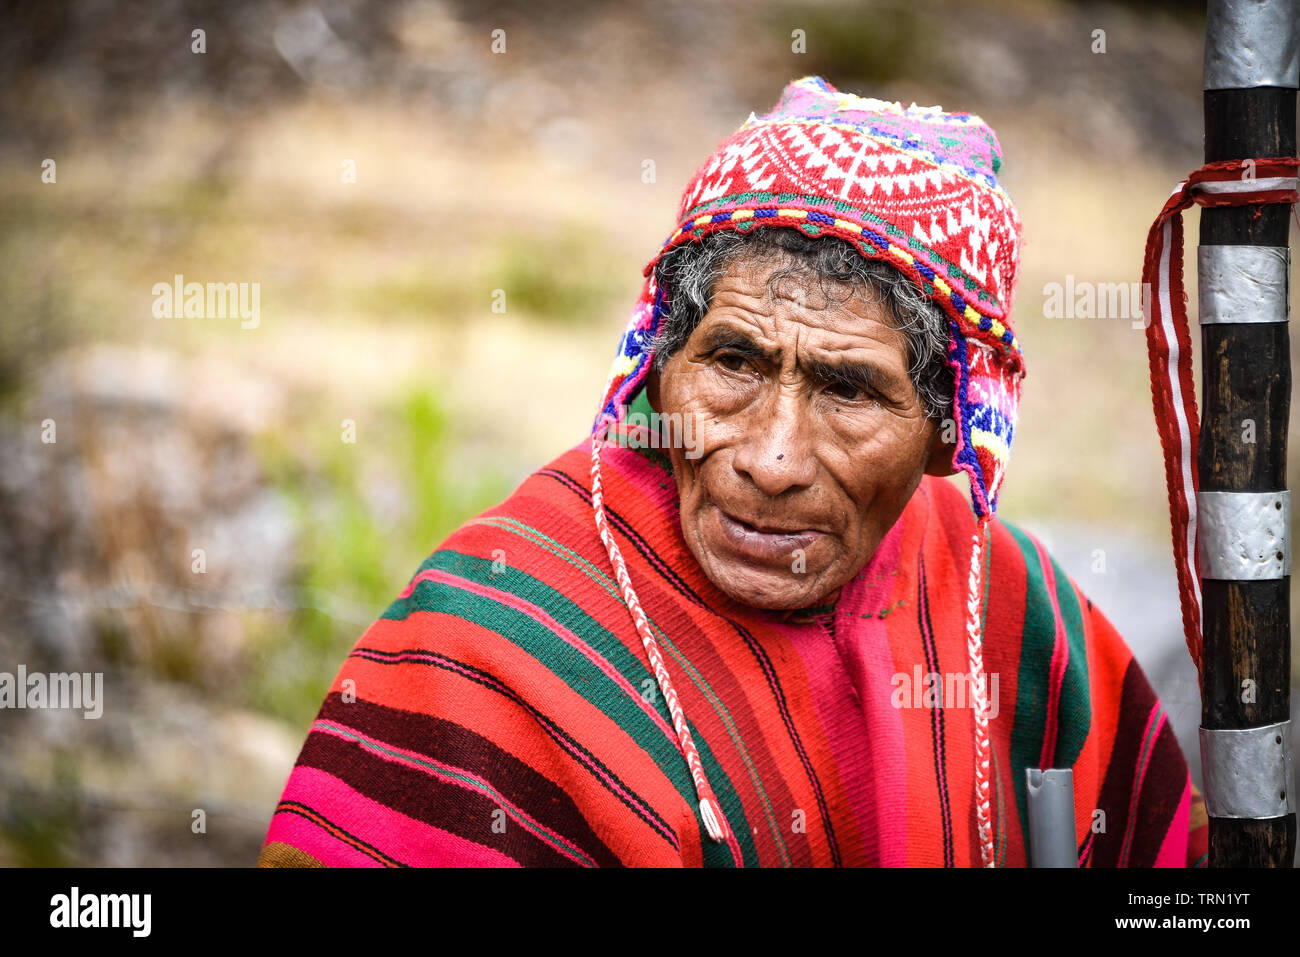 Sacred Valley, Cusco, Peru - Oct 13, 2018: An indigenous Quechua man in traditional dress Stock Photo